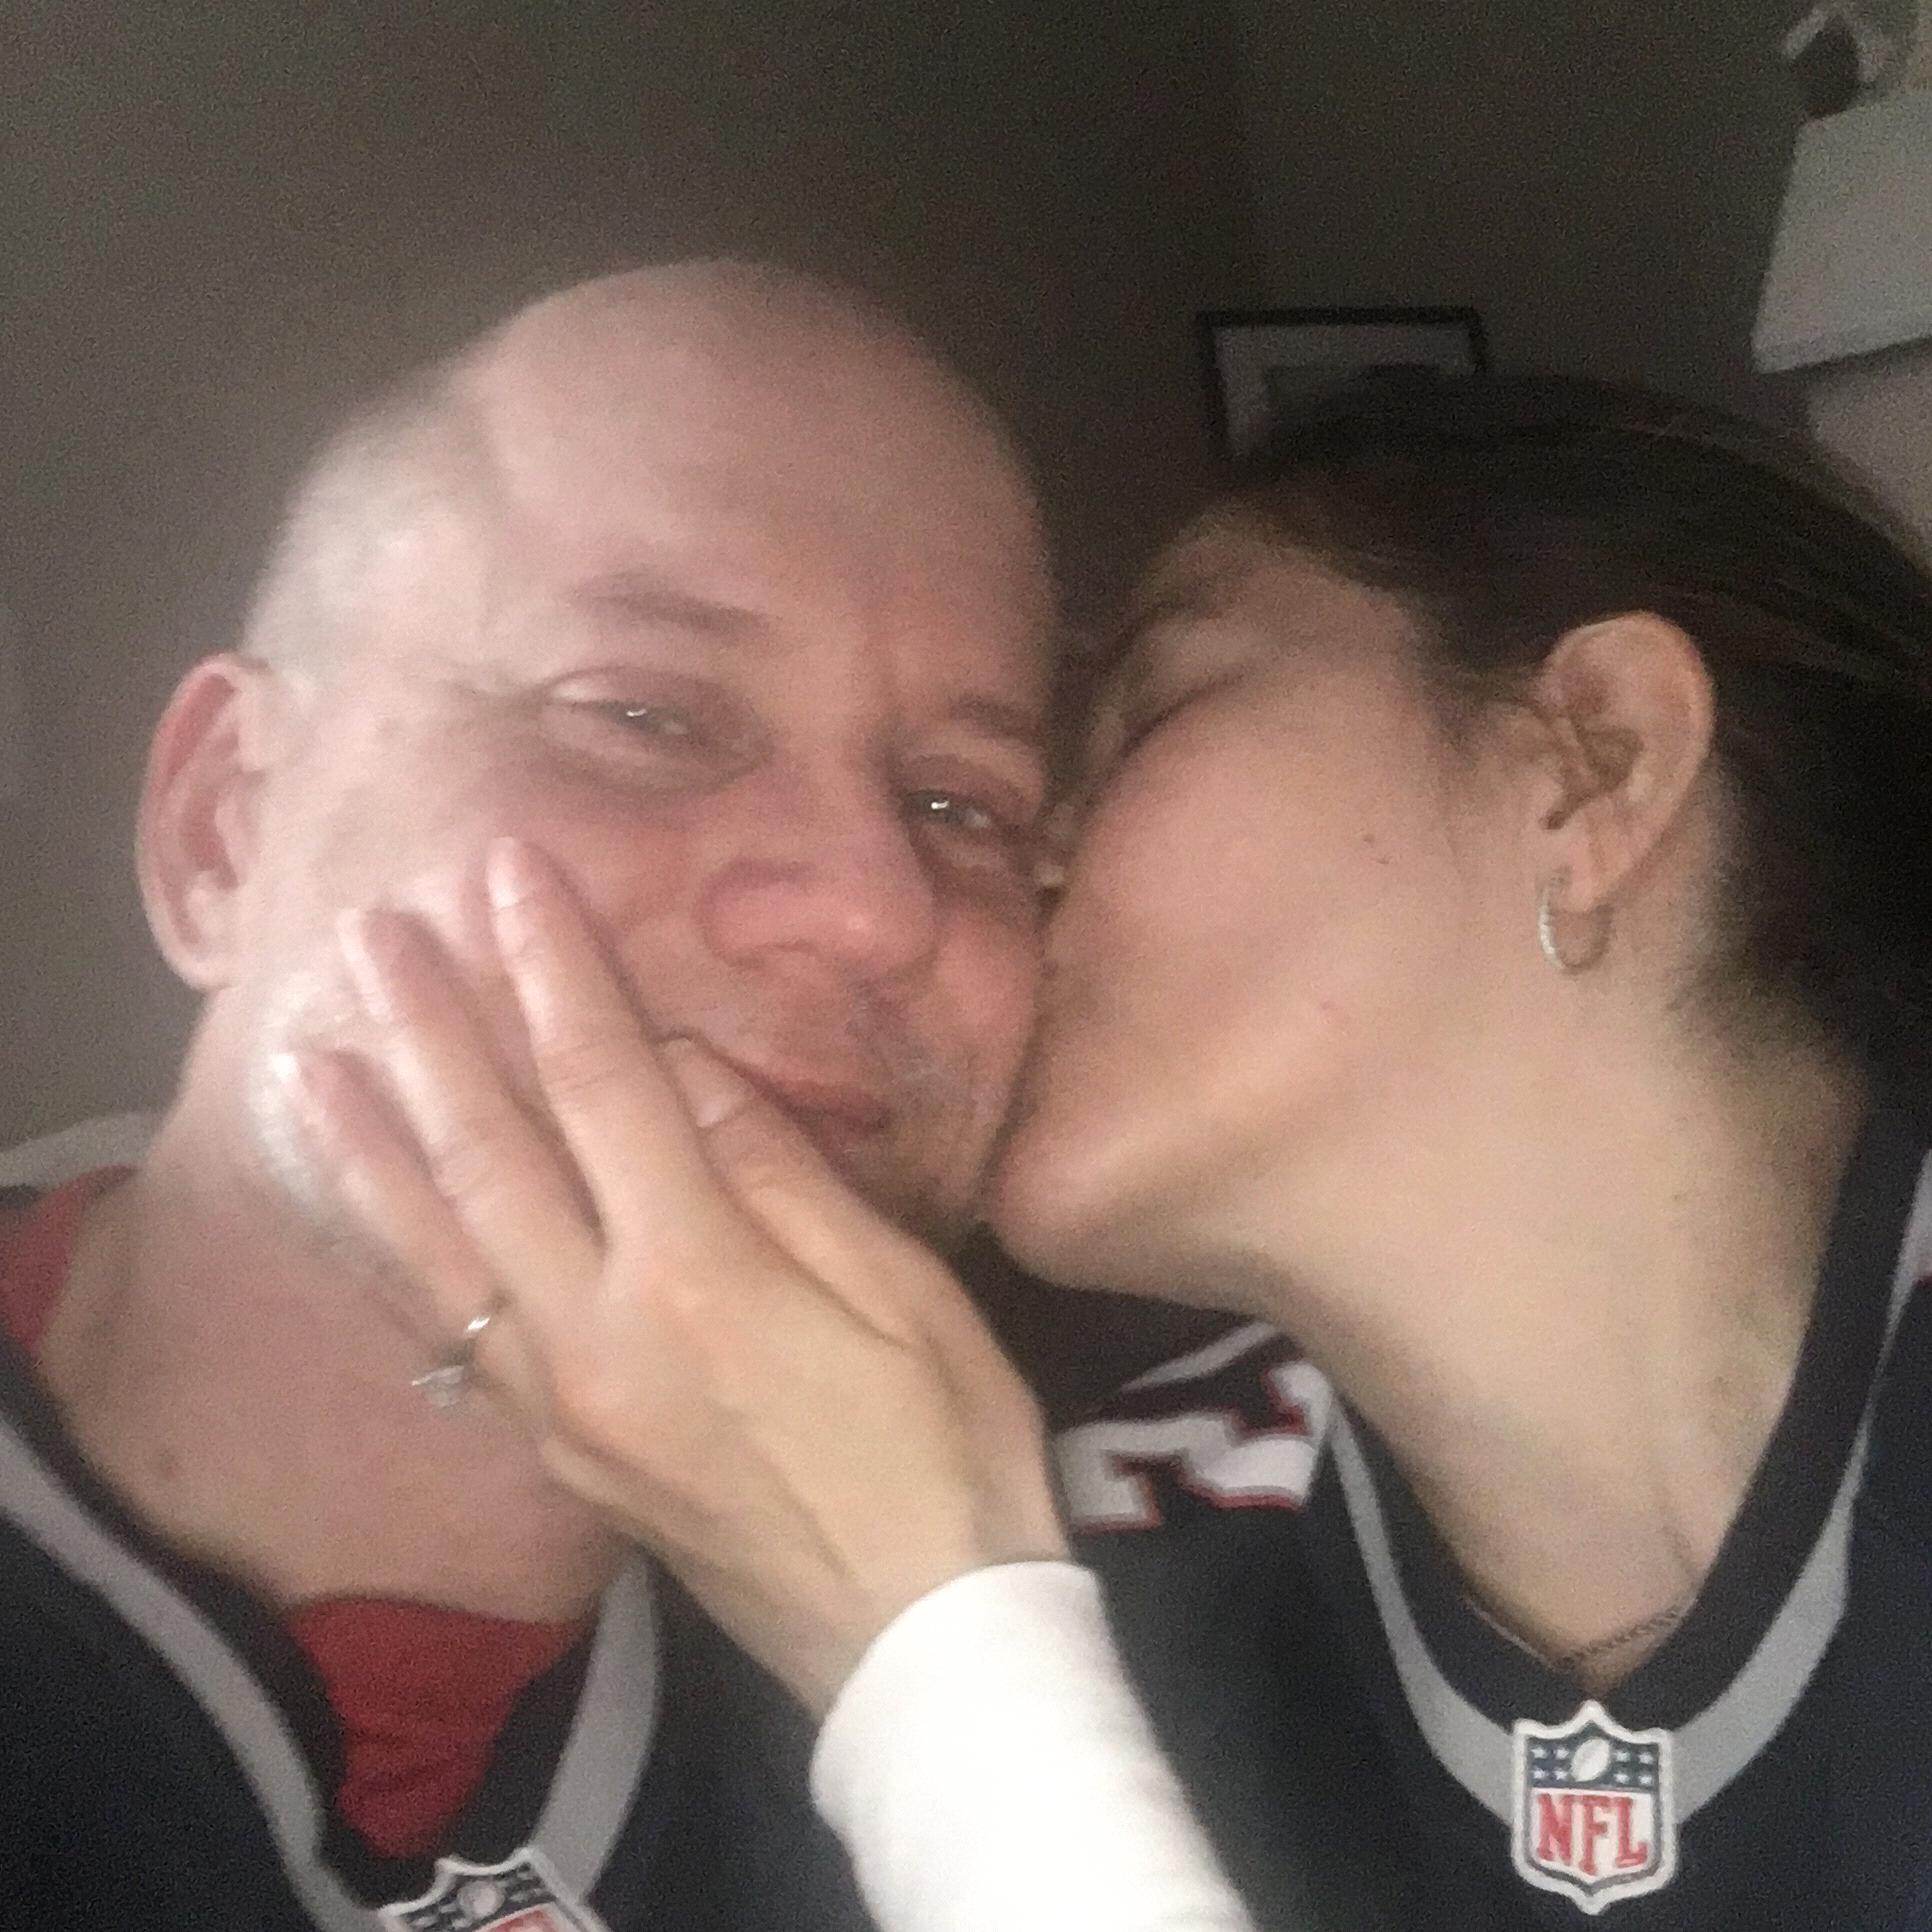 Watching a Pats game at home- Jan 2019 in Palm Harbor